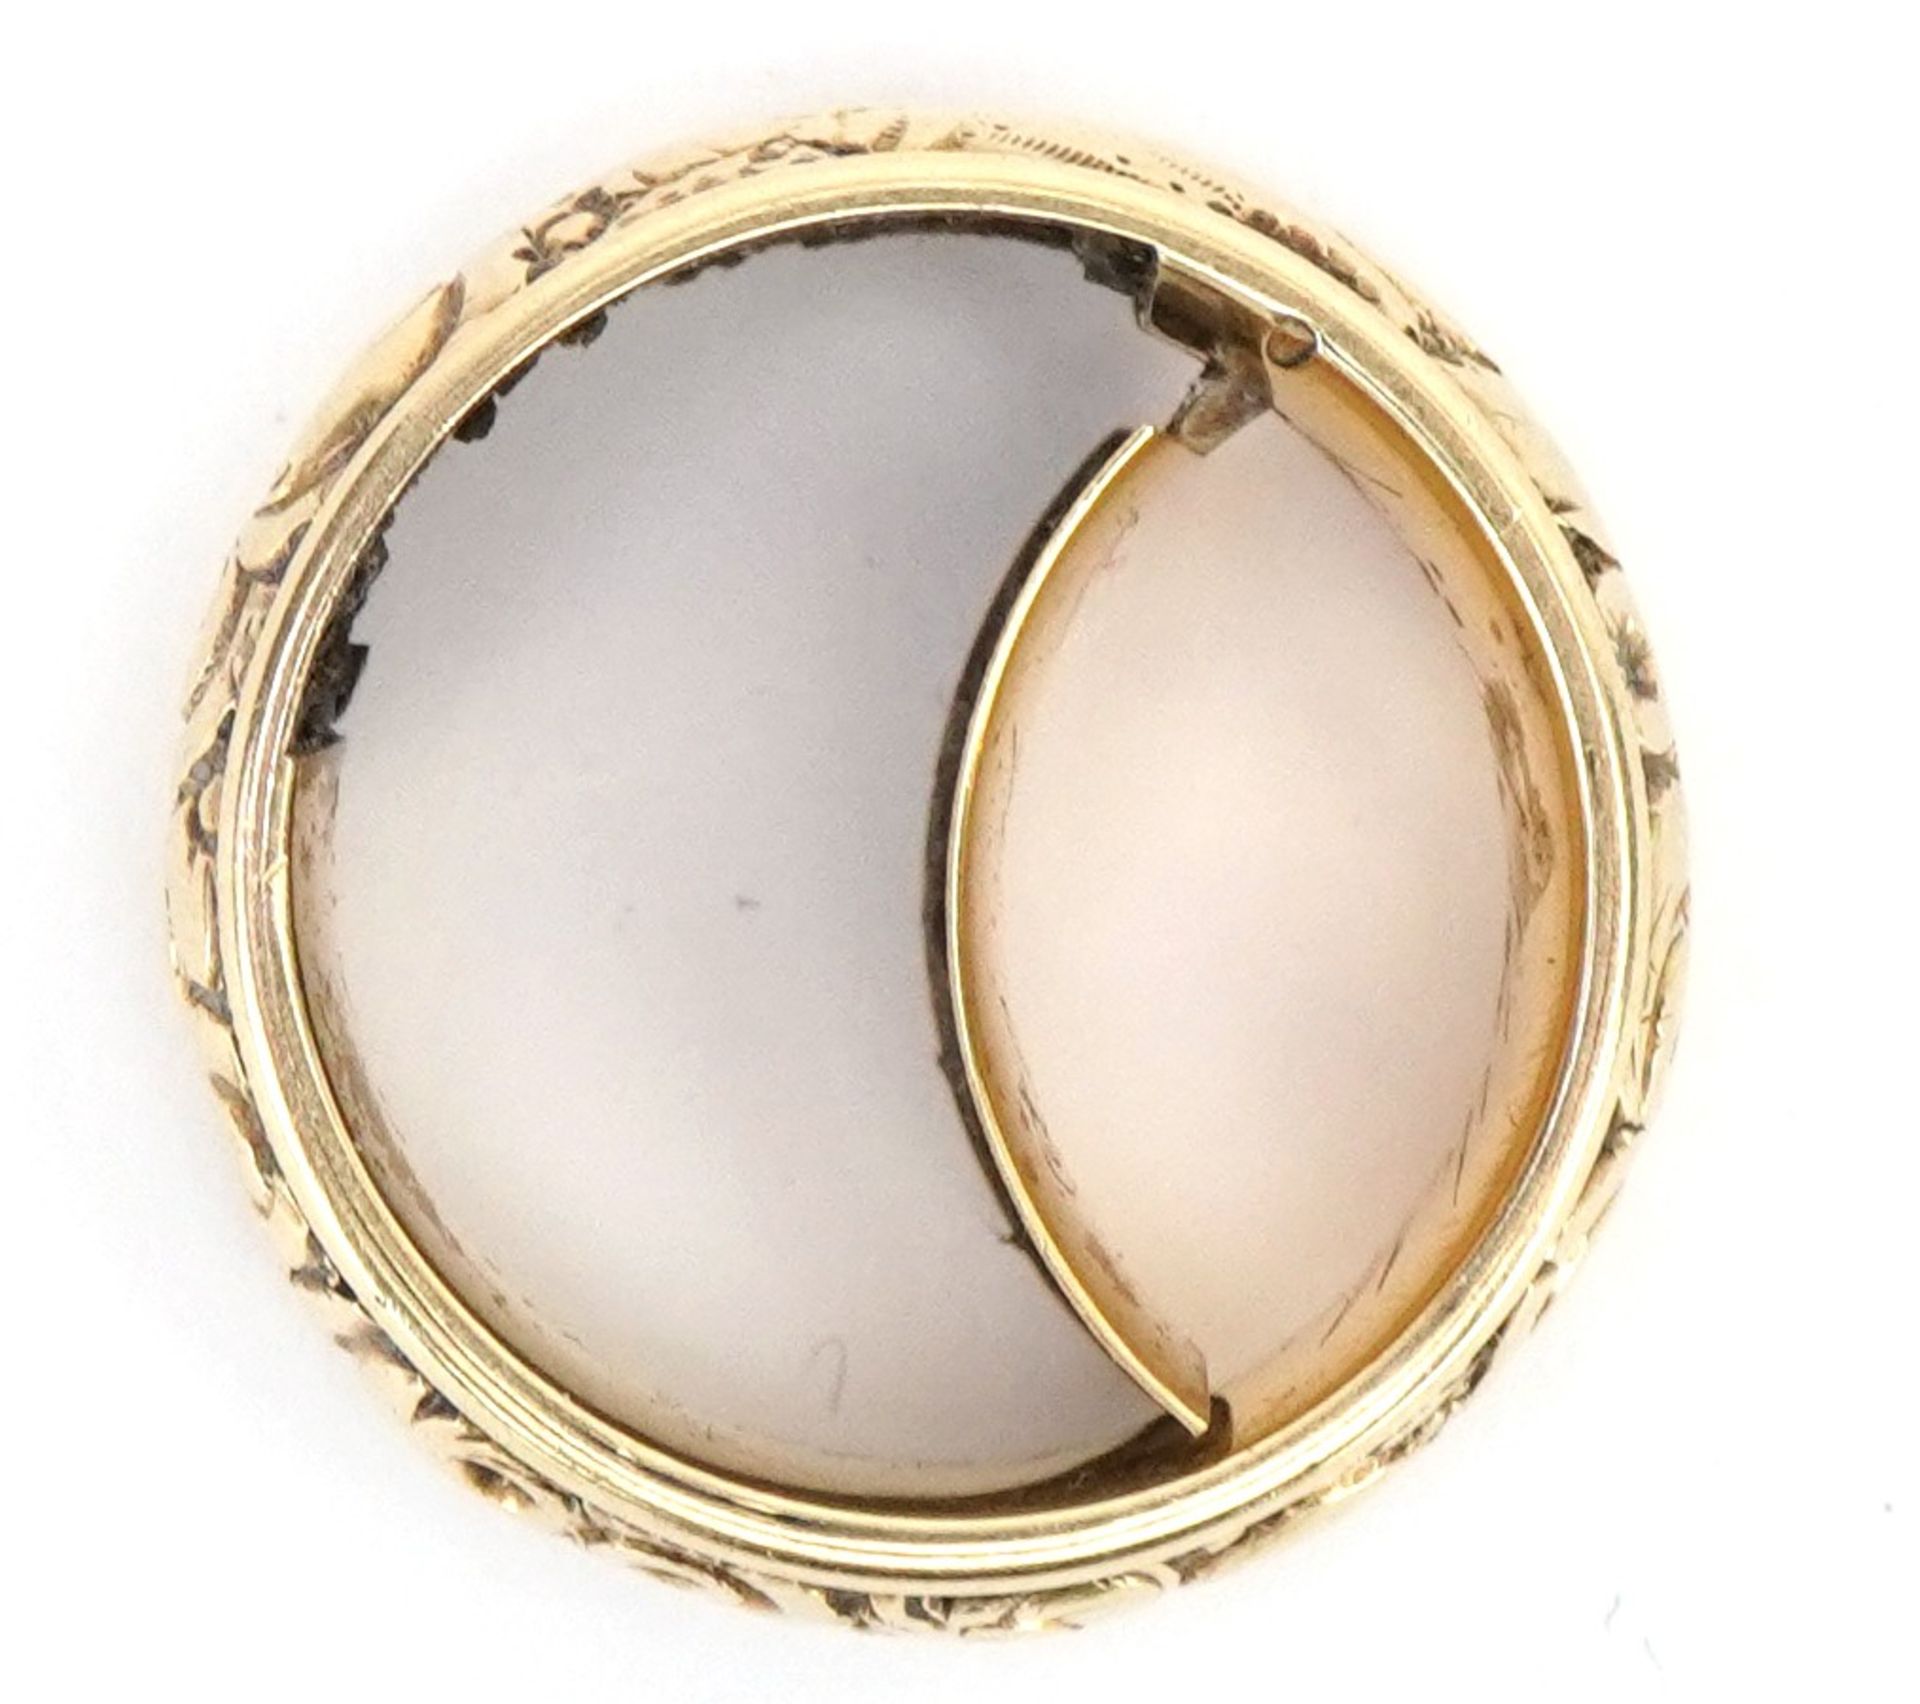 Georgian unmarked gold repousse band mourning ring with hidden locket compartment, tests as 22ct - Image 6 of 8